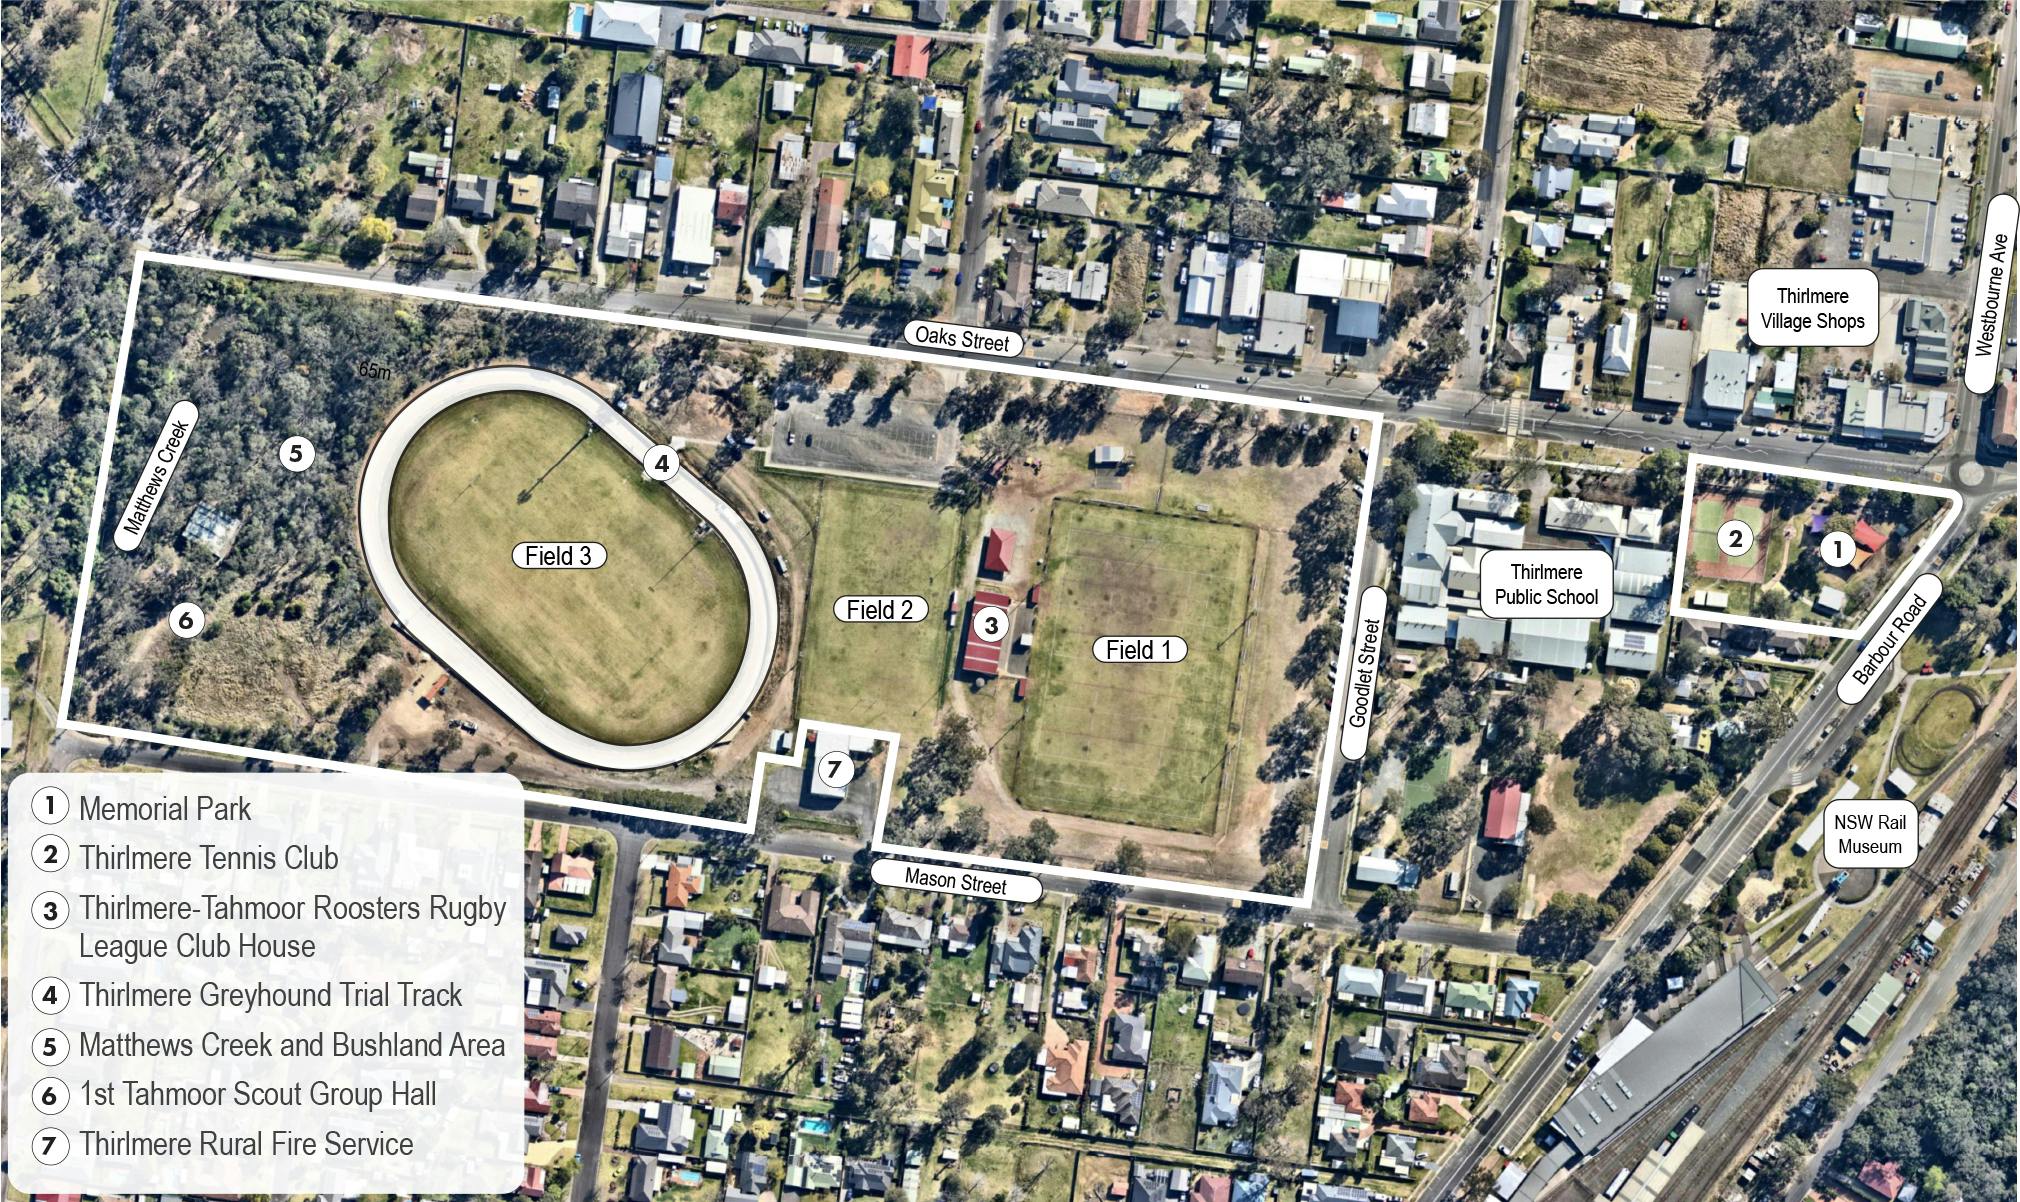 Aerial view of Thirlmere Sportsground and Memorial Park